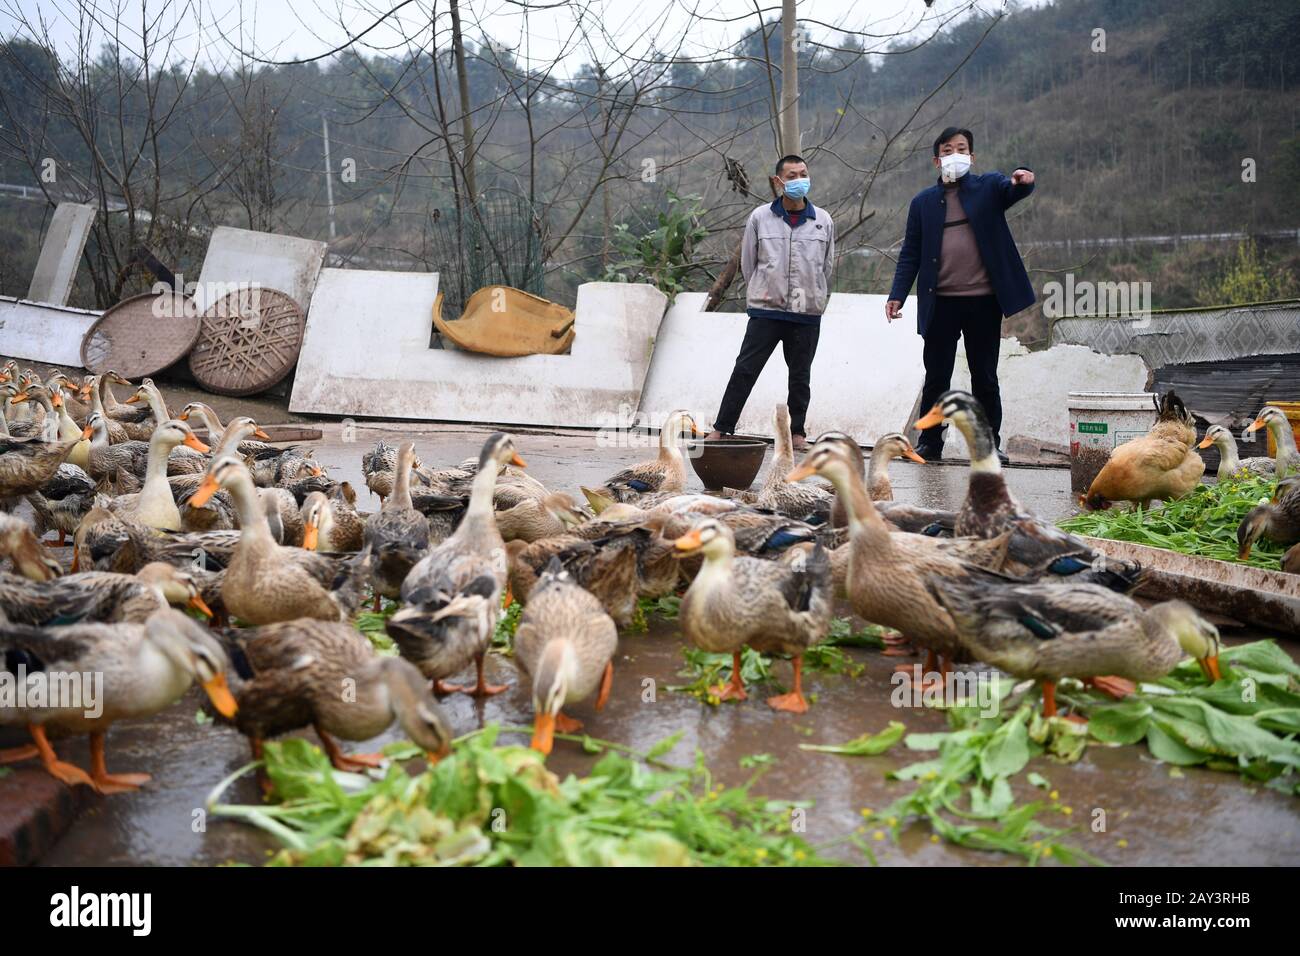 Chongqing, China. 14th Feb, 2020. Farmer Fu Zongyong (L) and a staff of local government count ducks at Shuangjing village of Yufengshan Town in Yubei District of southwest China's Chongqing Municipality, Feb. 14, 2020. Since the outbreak of the novel coronavirus, Fu Zongyong, a poverty-striken farmer has been unable to sell his ducks due to the closing of live poultry markets. Local authorities sent staff to help him with quarantine and sales of ducks to ensure his income during the battle against the epidemic. Credit: Xinhua/Alamy Live News Stock Photo